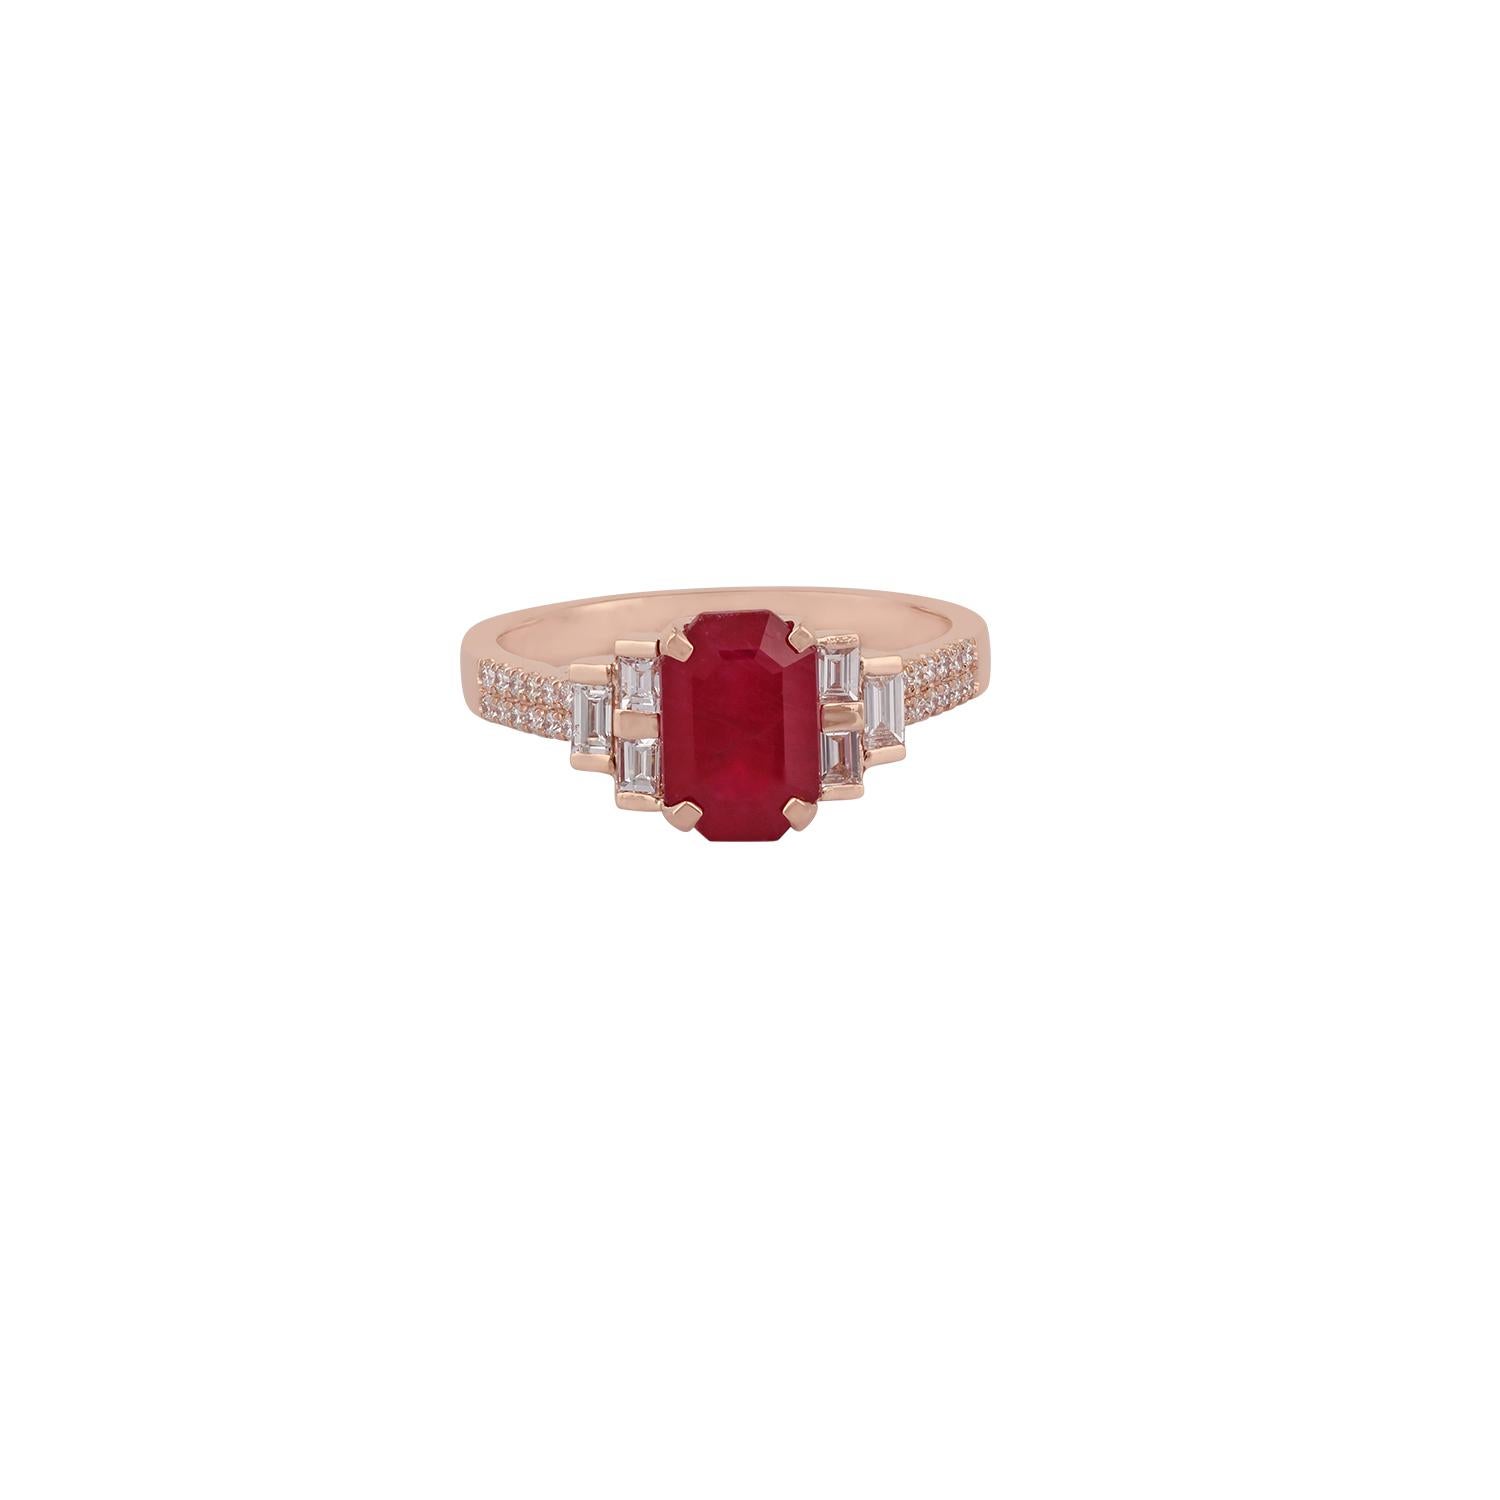 Apart of our carefully curated collection, this ring proudly displays a 2.26 carat Burma ruby crowning a 18k Gold  band. The ruby's prongs hold the stone tightly but allow it to be seen in its entirety. The center stone is surrounded by beautiful